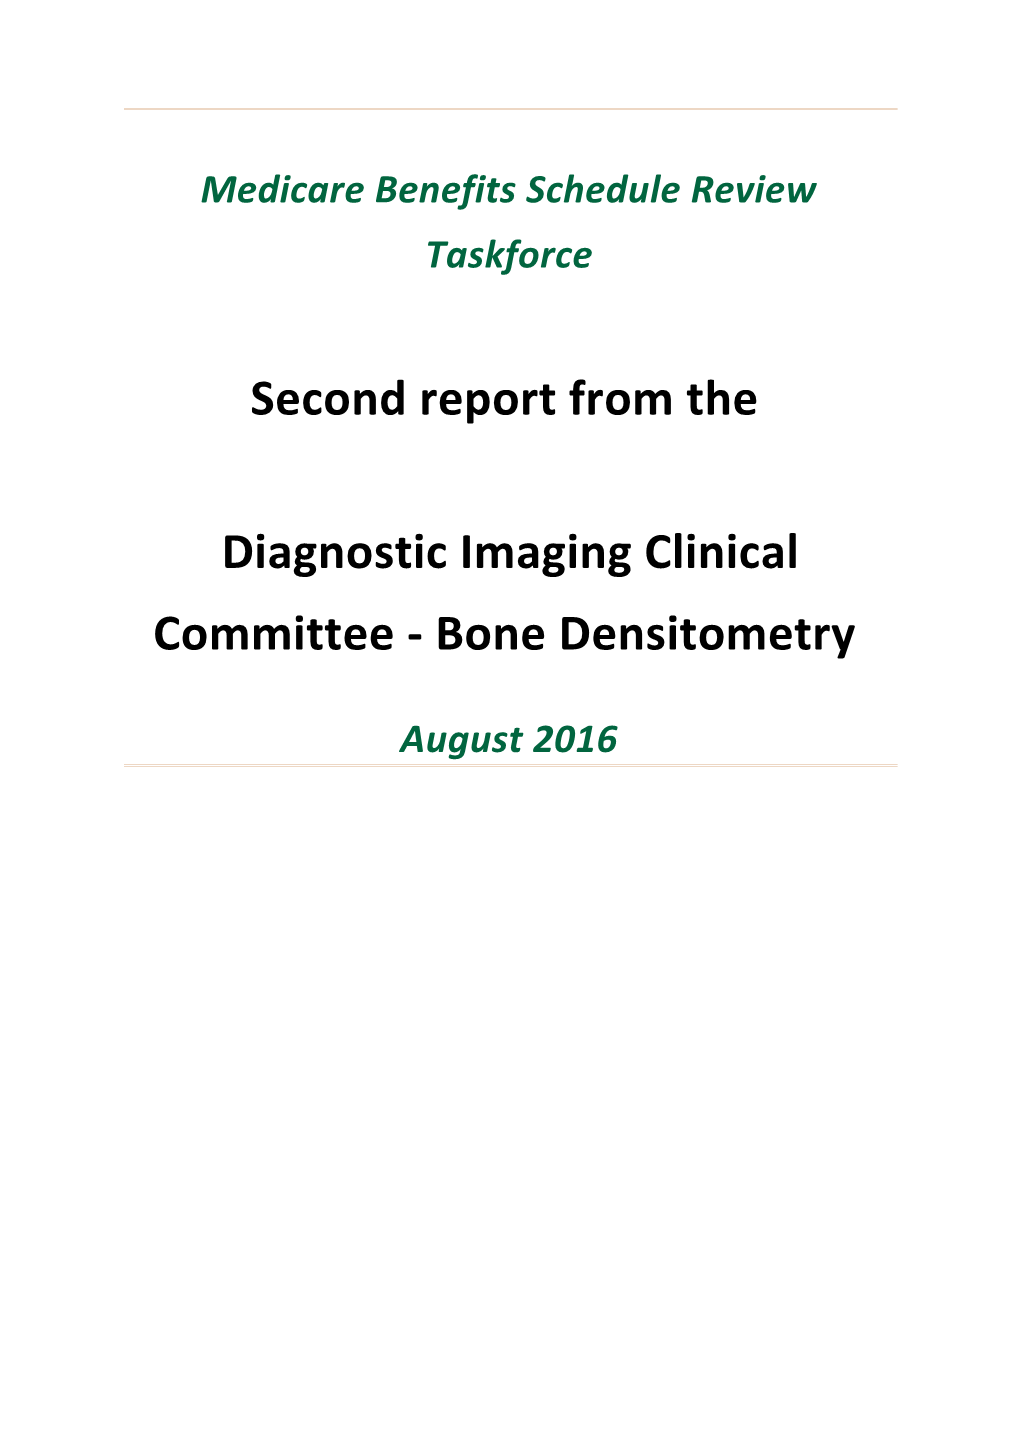 Report From The Diagnostic Imaging Clinical Committee On The Review Of Bone Densitometry